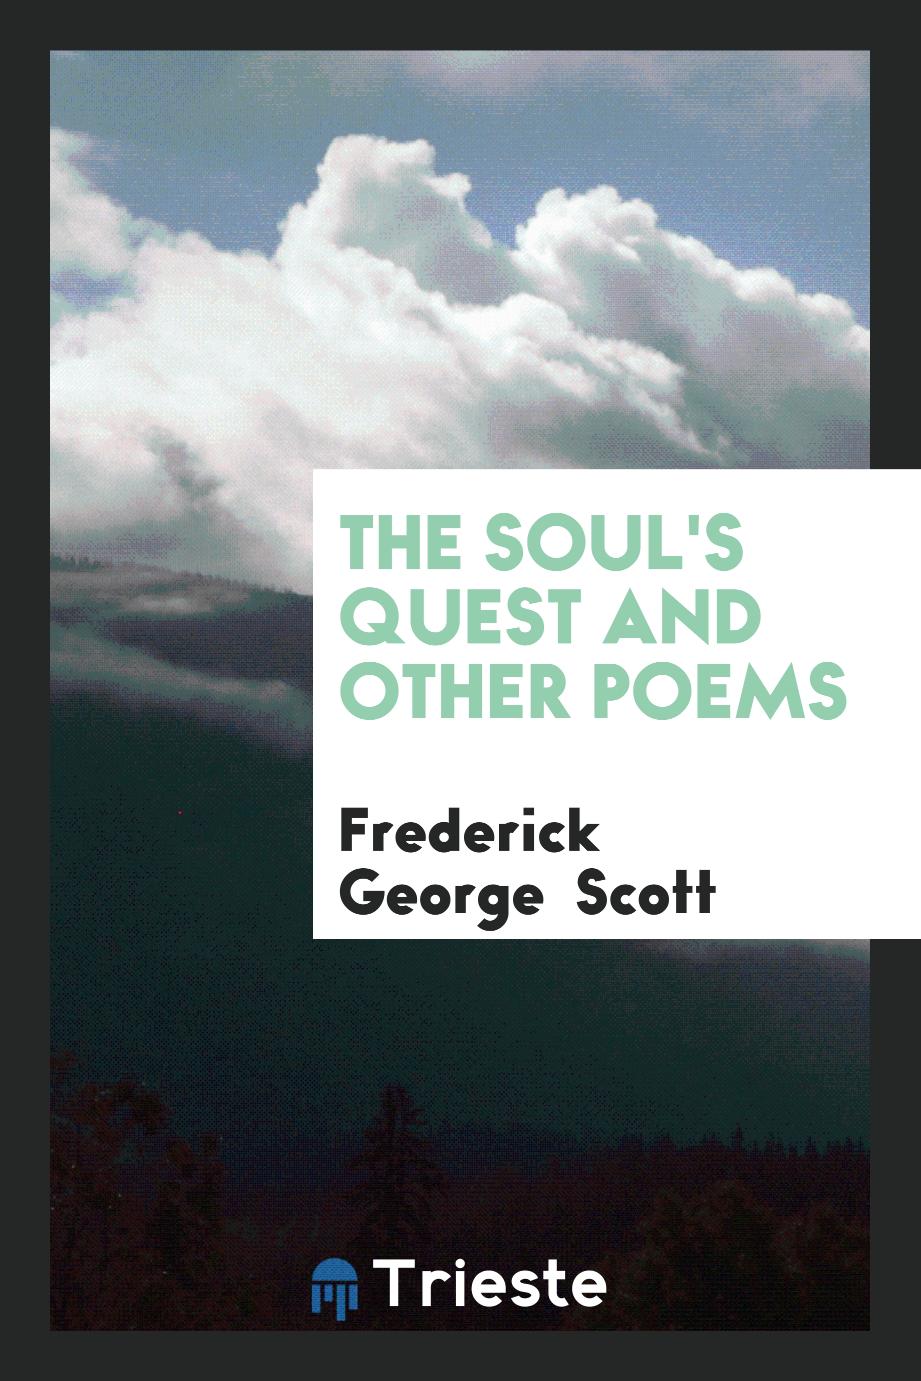 The Soul's Quest and Other Poems